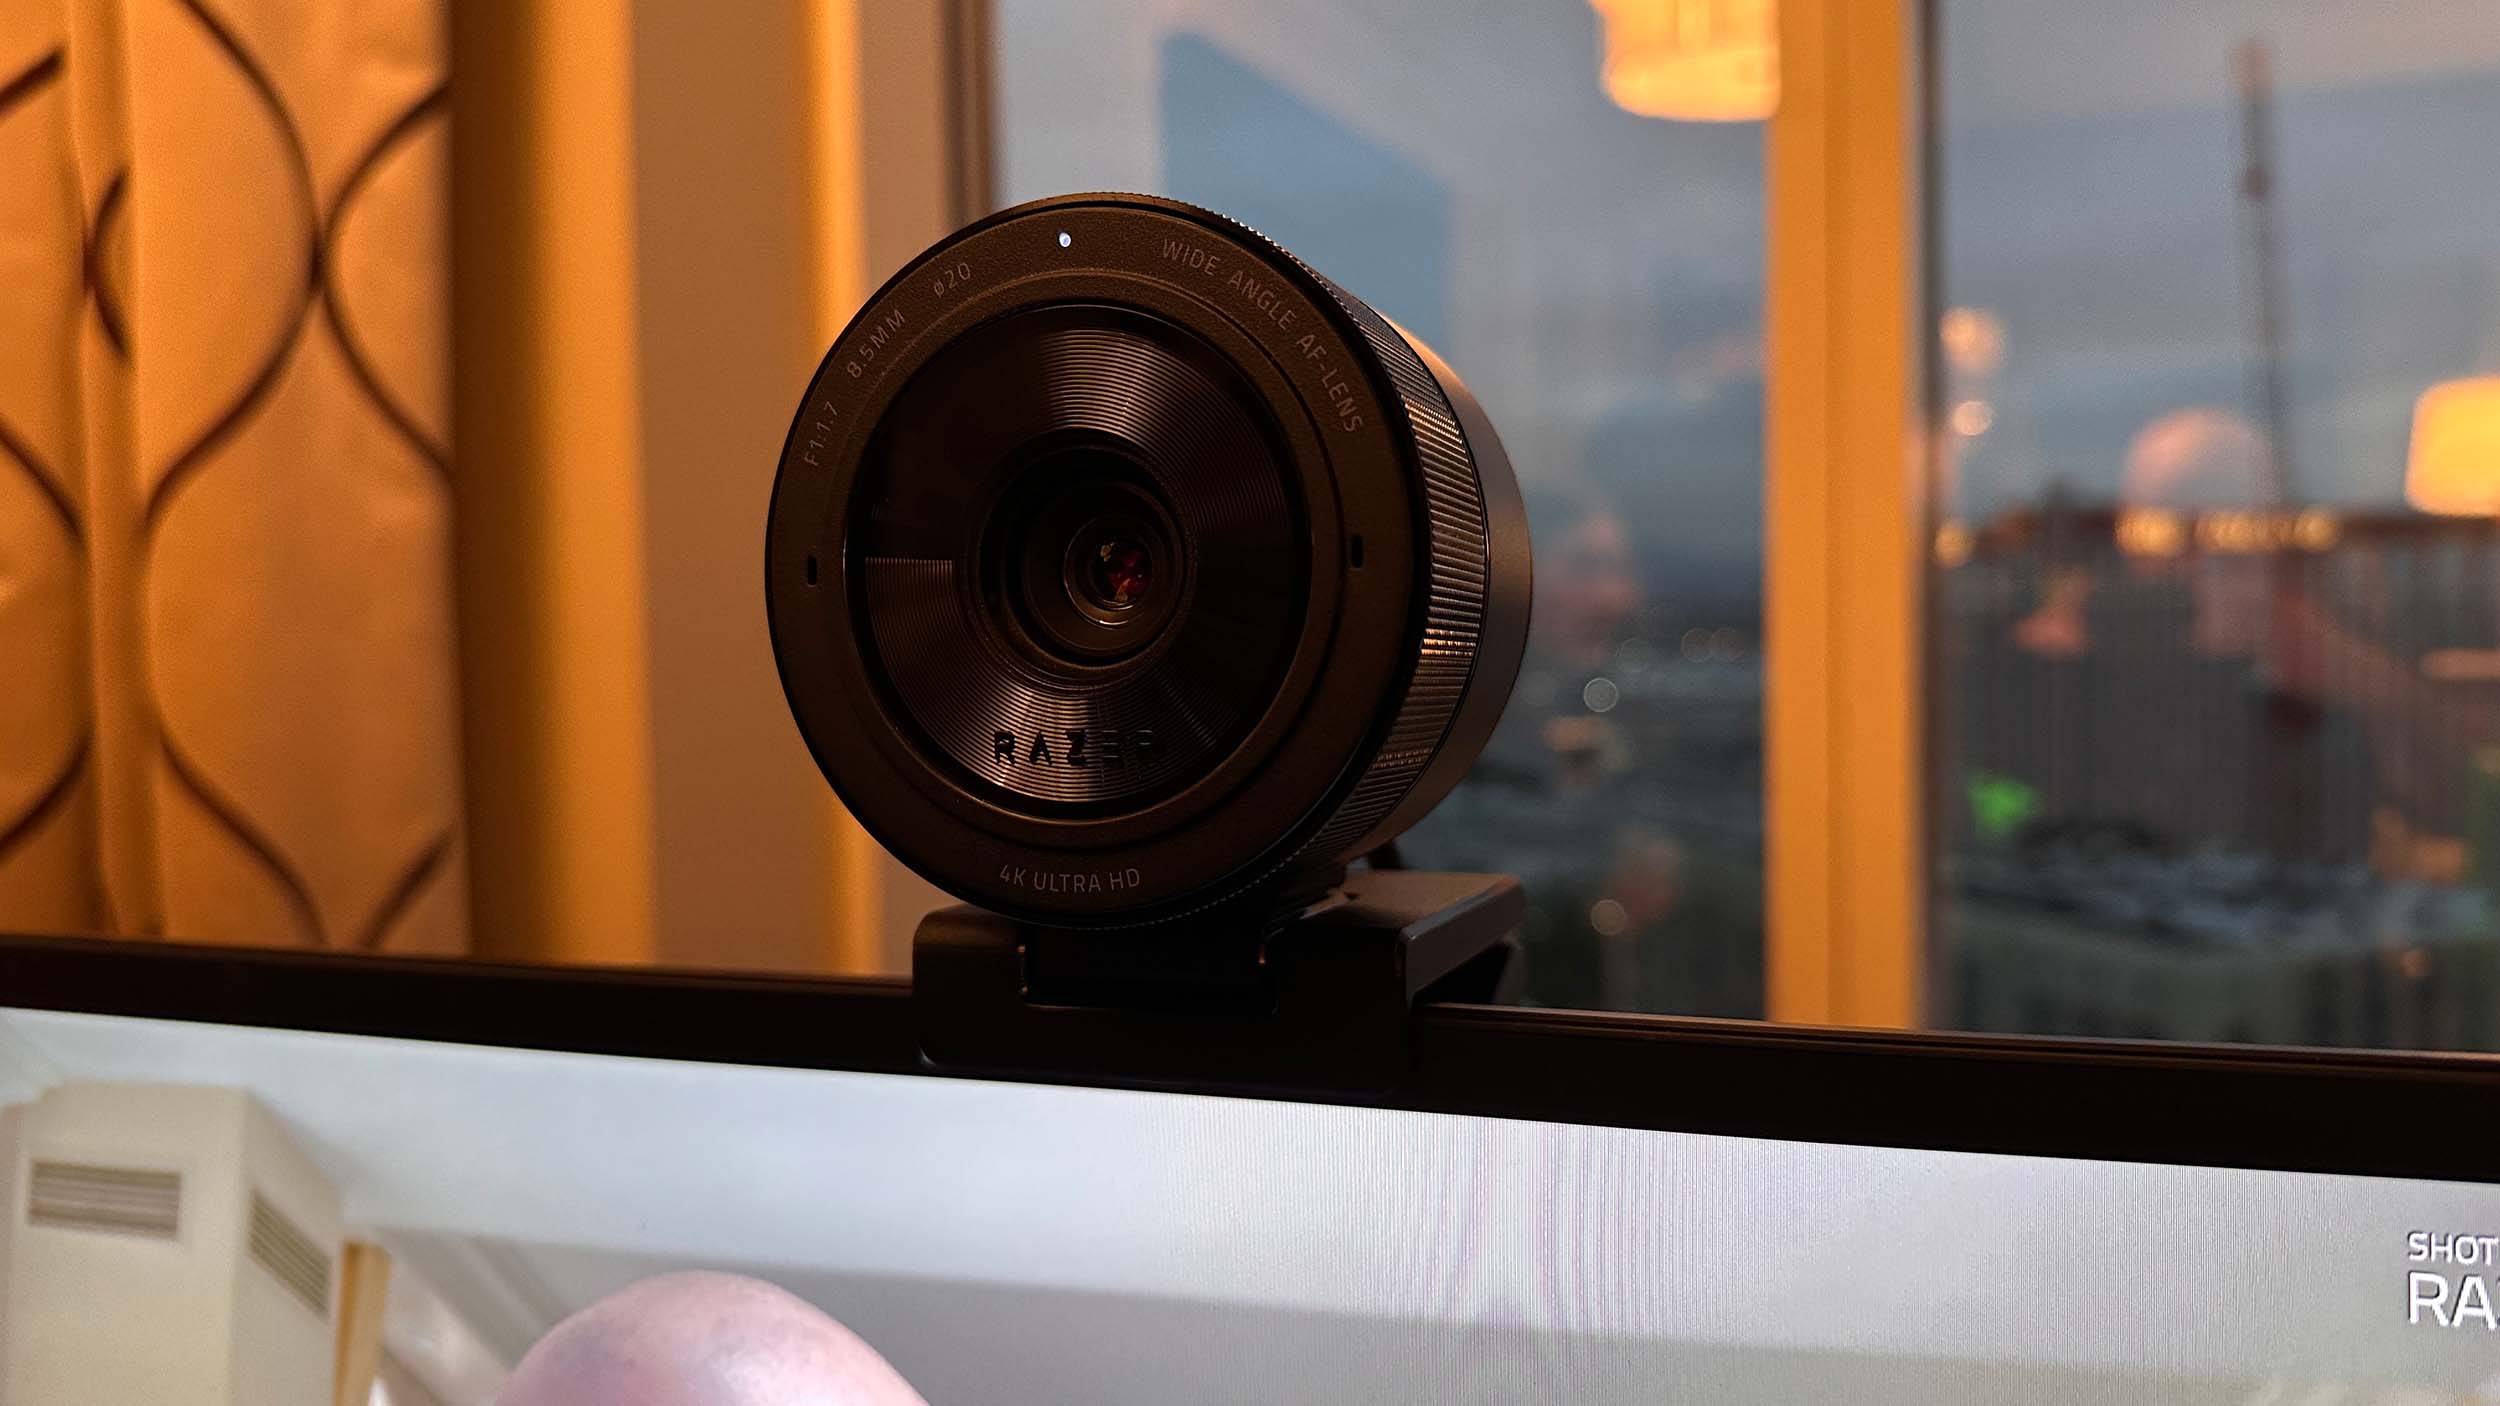 The Razer Kiyo Pro Ultra Features the Largest Sensor Ever in a Webcam